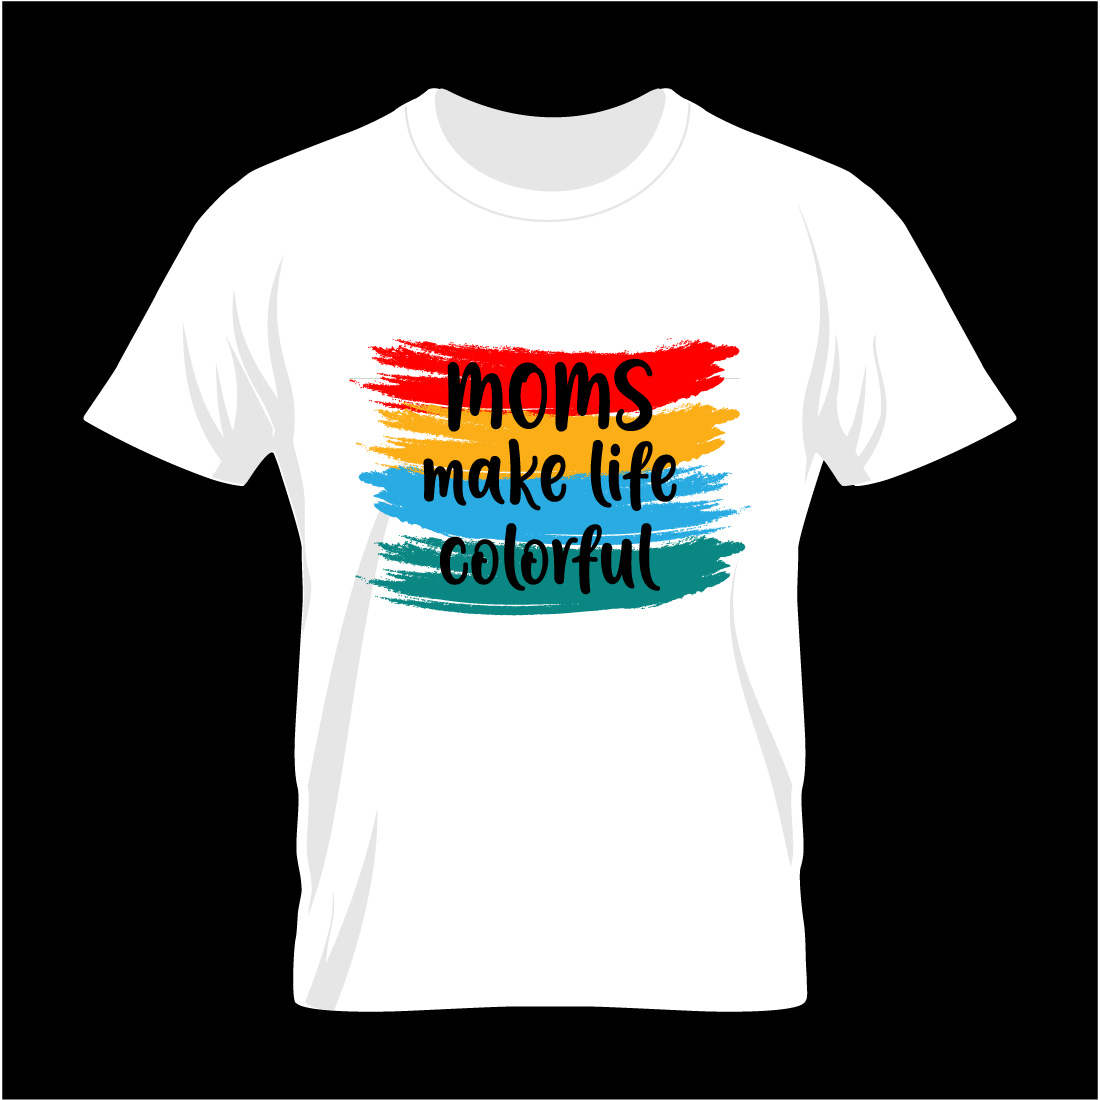 White t - shirt that says moms make life colorful.